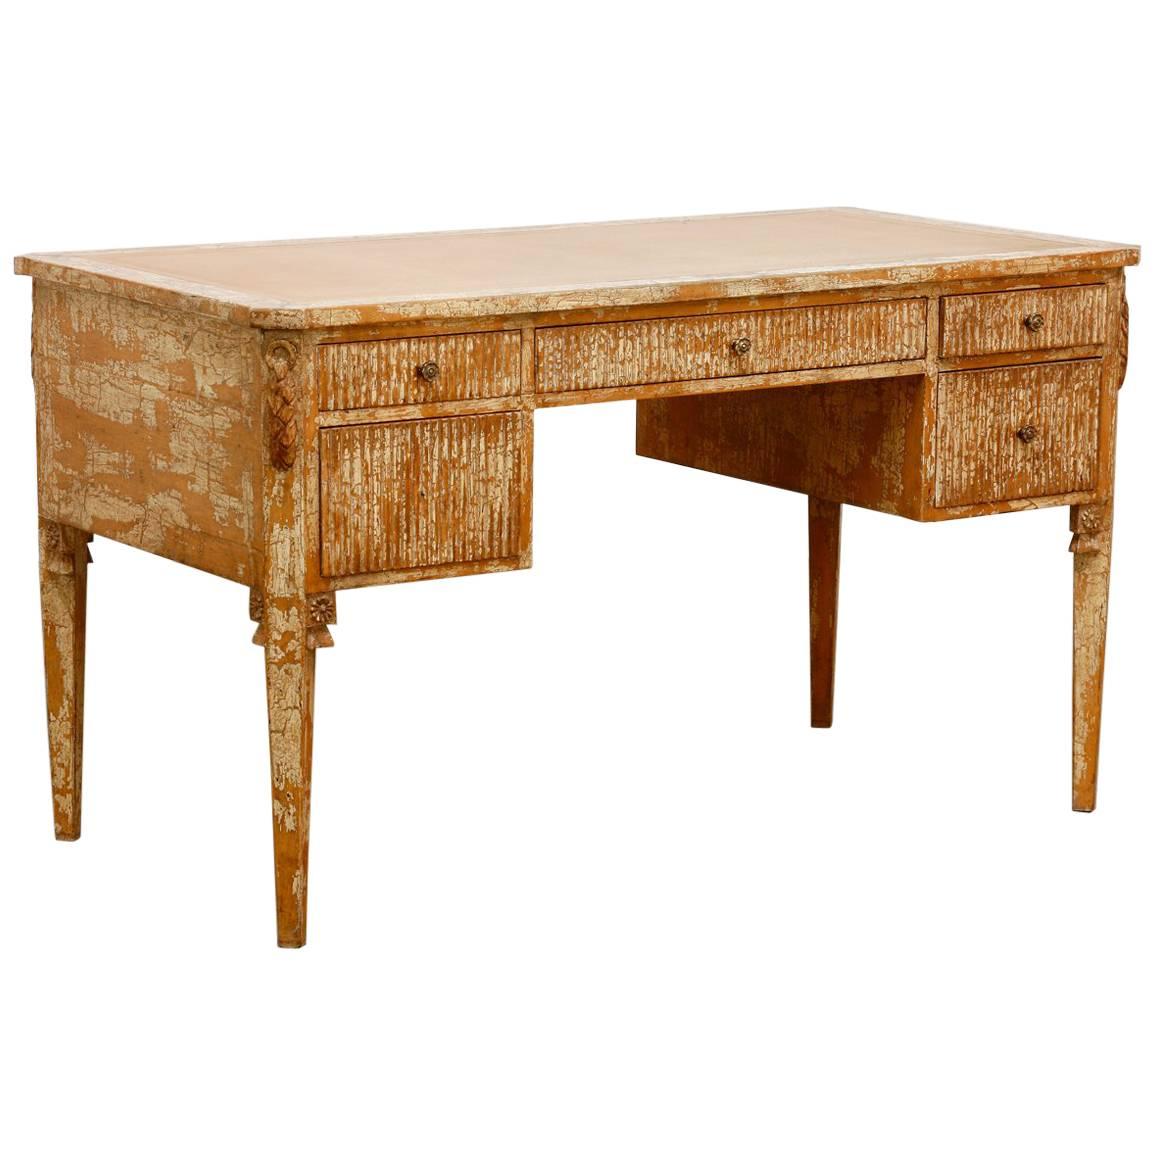 Neoclassical Leather Top Desk with Scraped Lacquer Finish